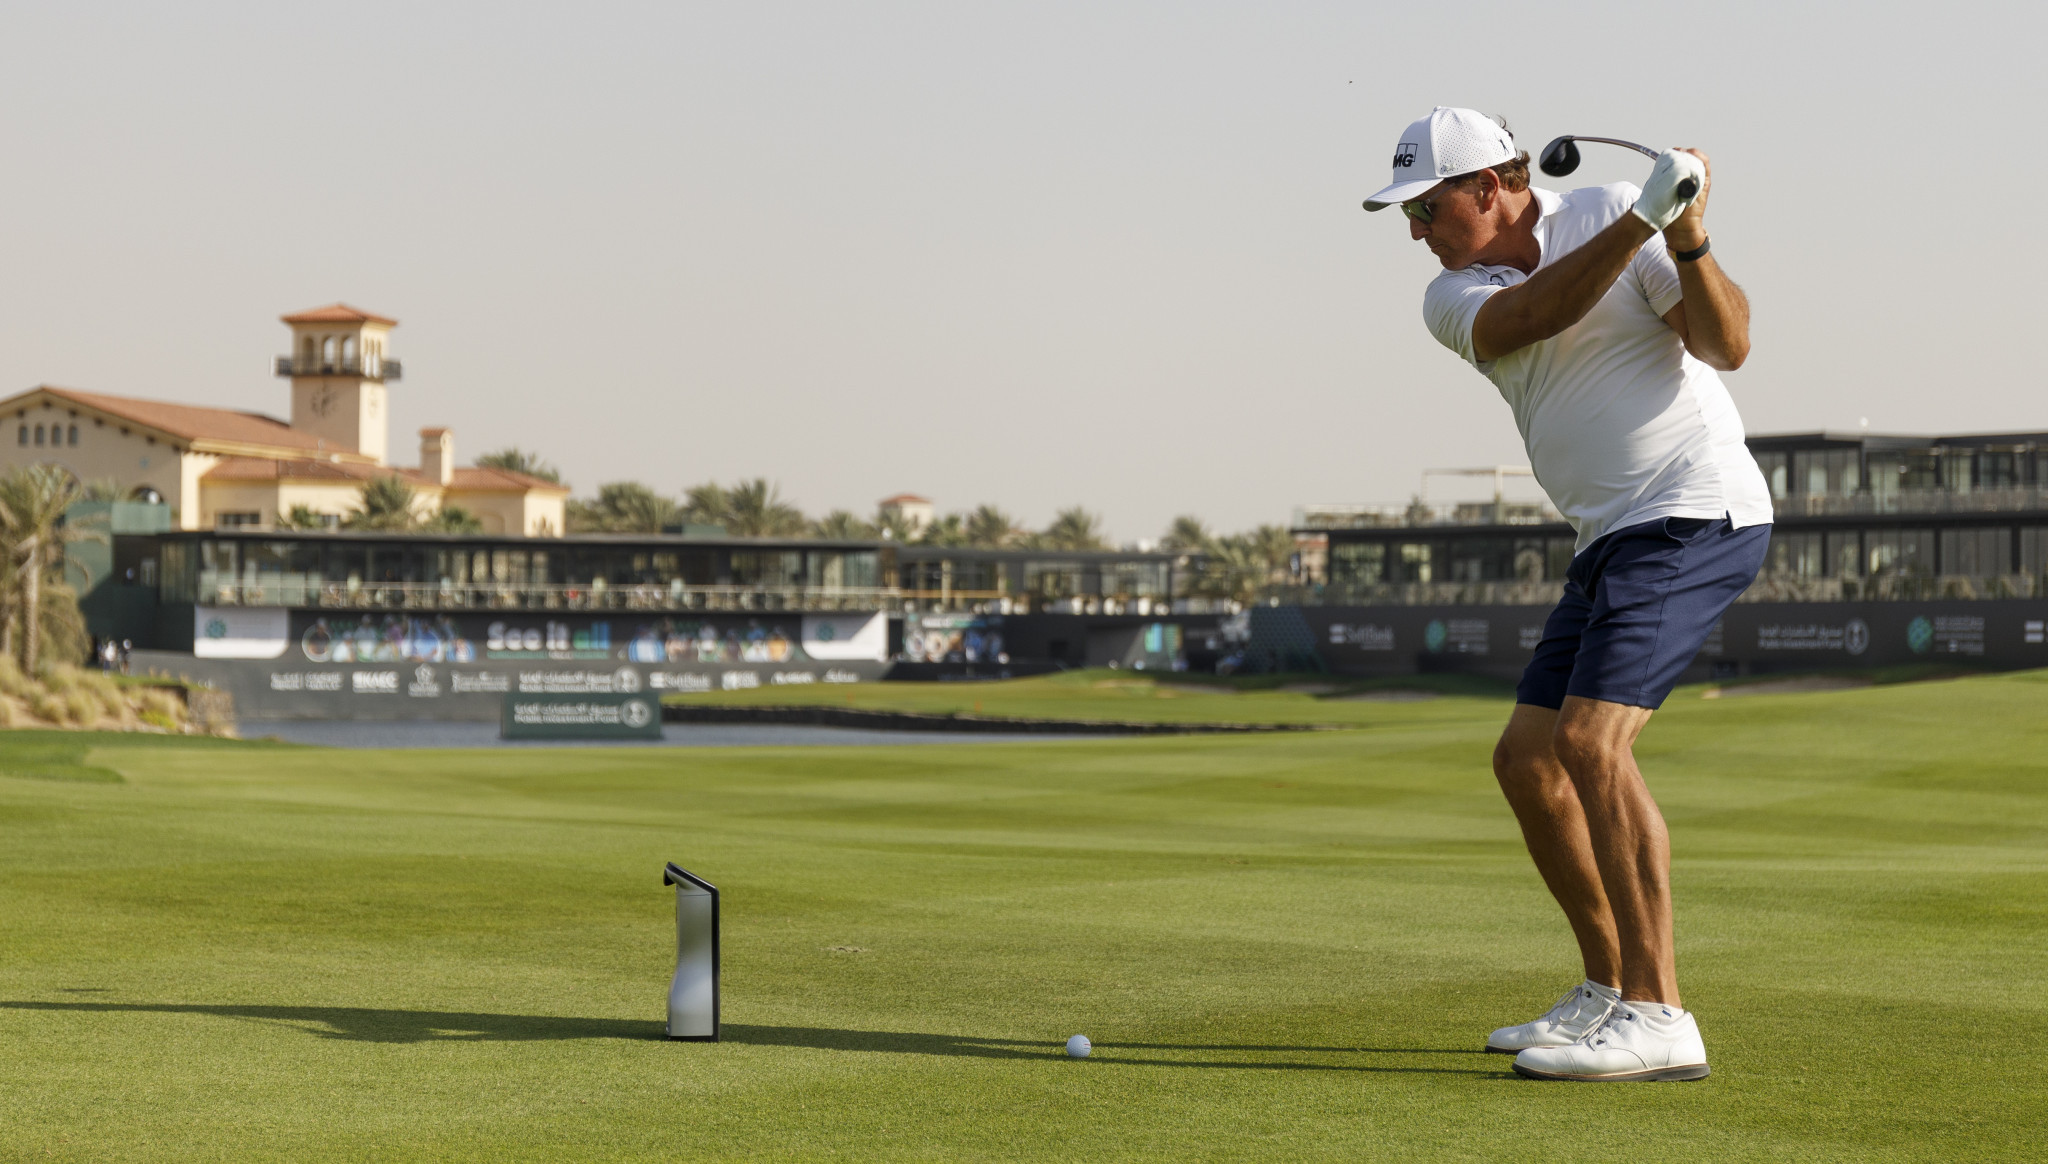 IGF says "premature" to take stance on Saudi Golf League while player opposition halts momentum